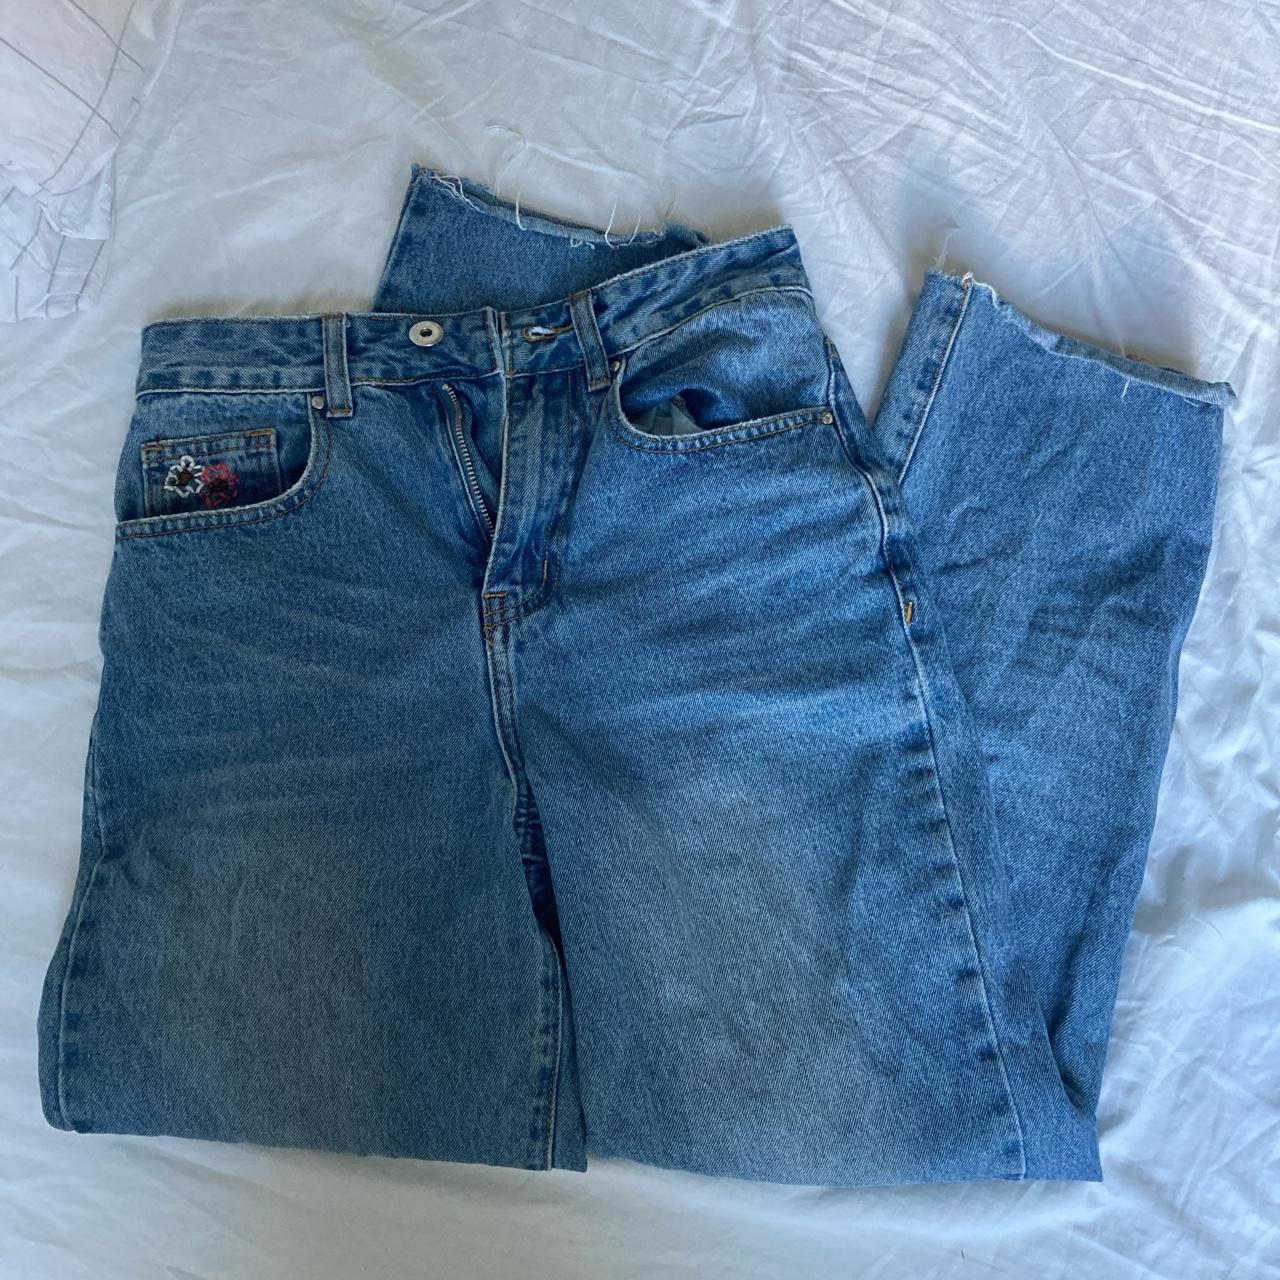 Straight Leg Jeans Little embroidery flowers on the... - Depop